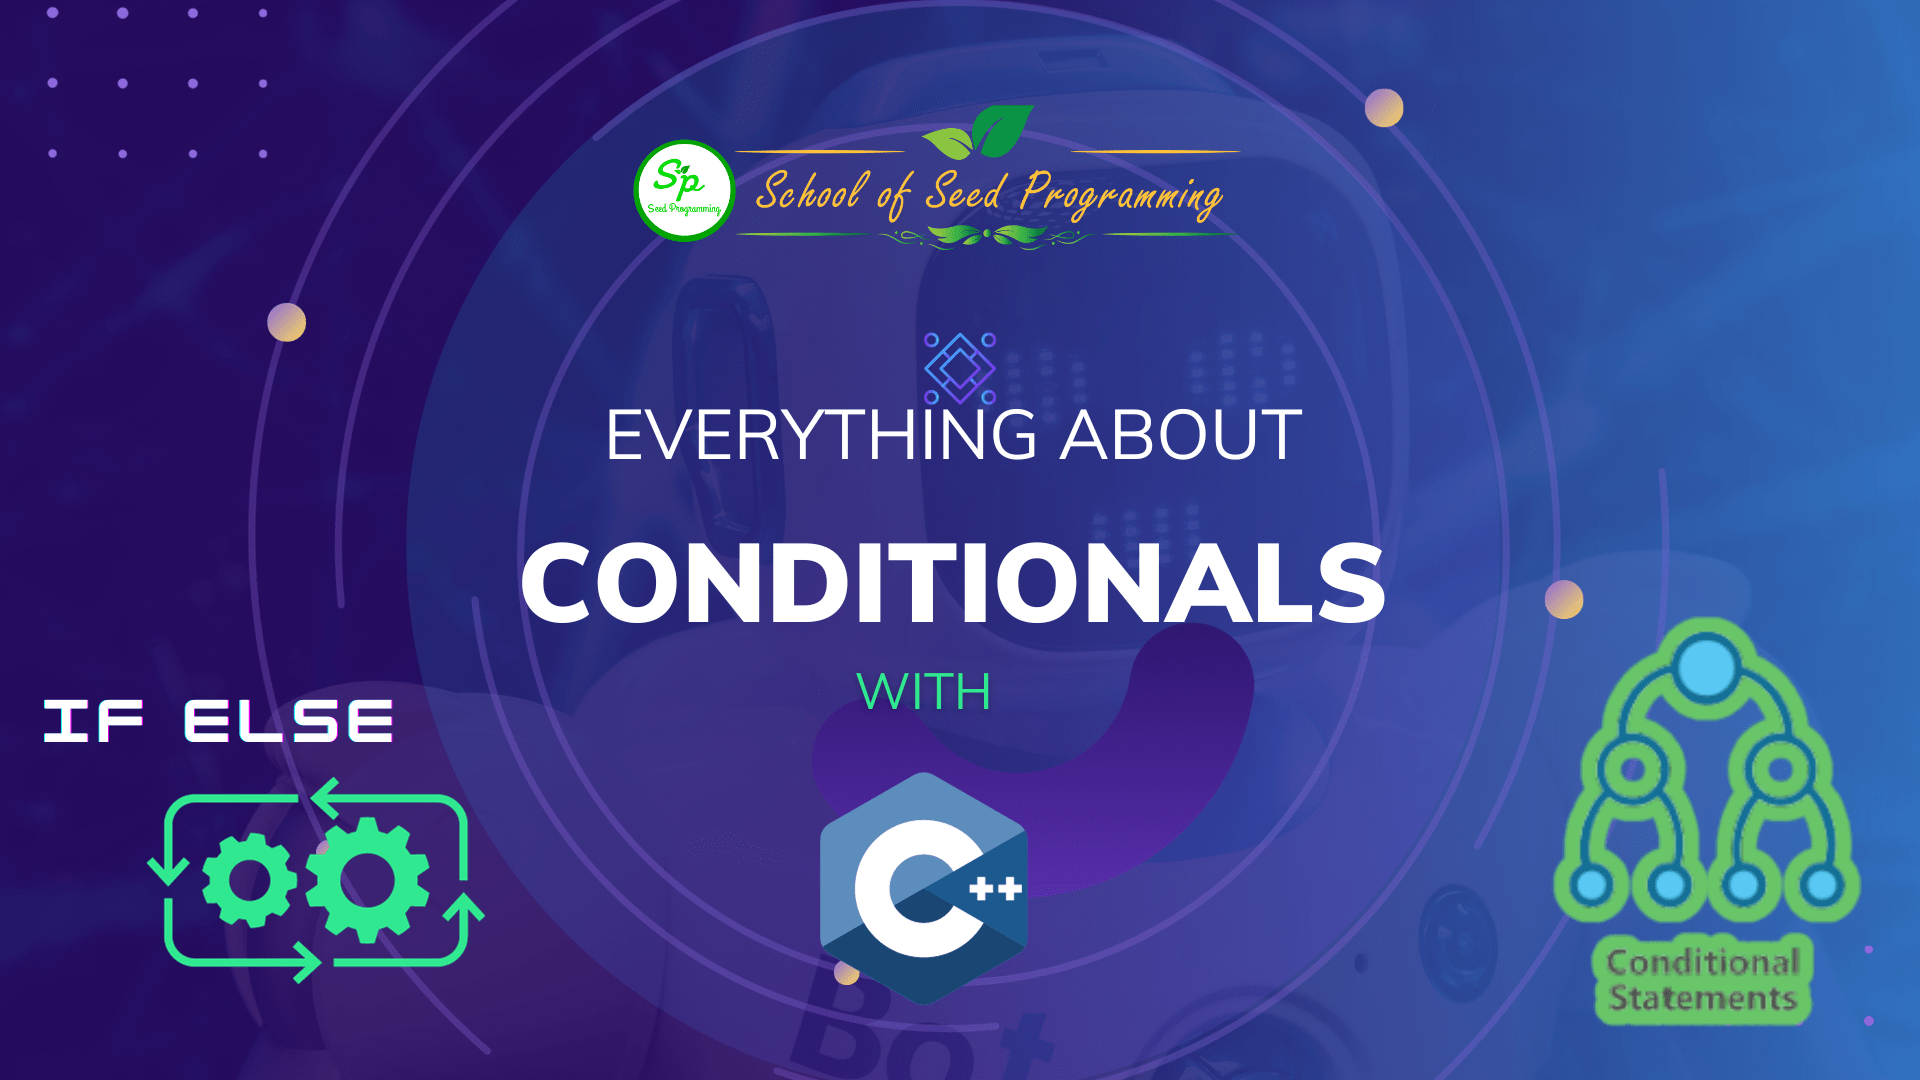 Everything about Conditionals